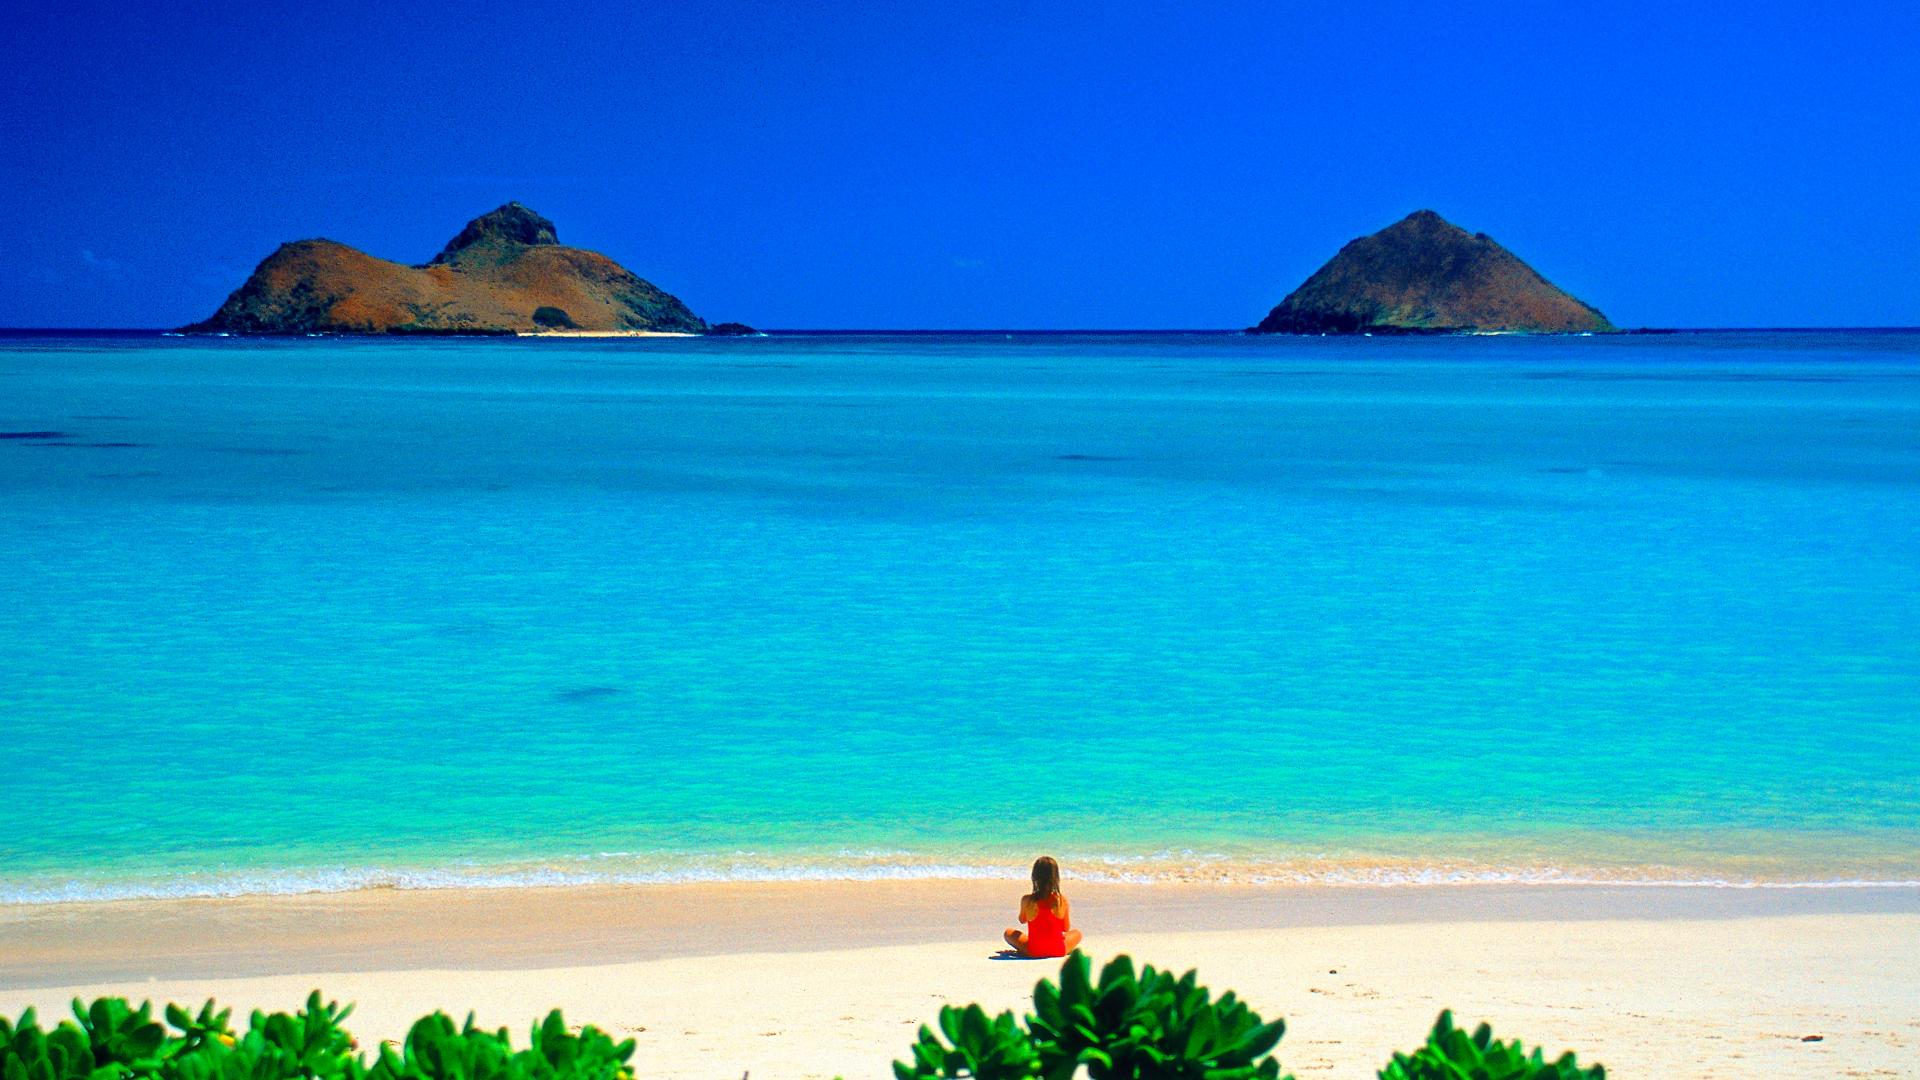  cool backgrounds beach hawaii 1920x1080px Wallpapers Full Size 1920x1080